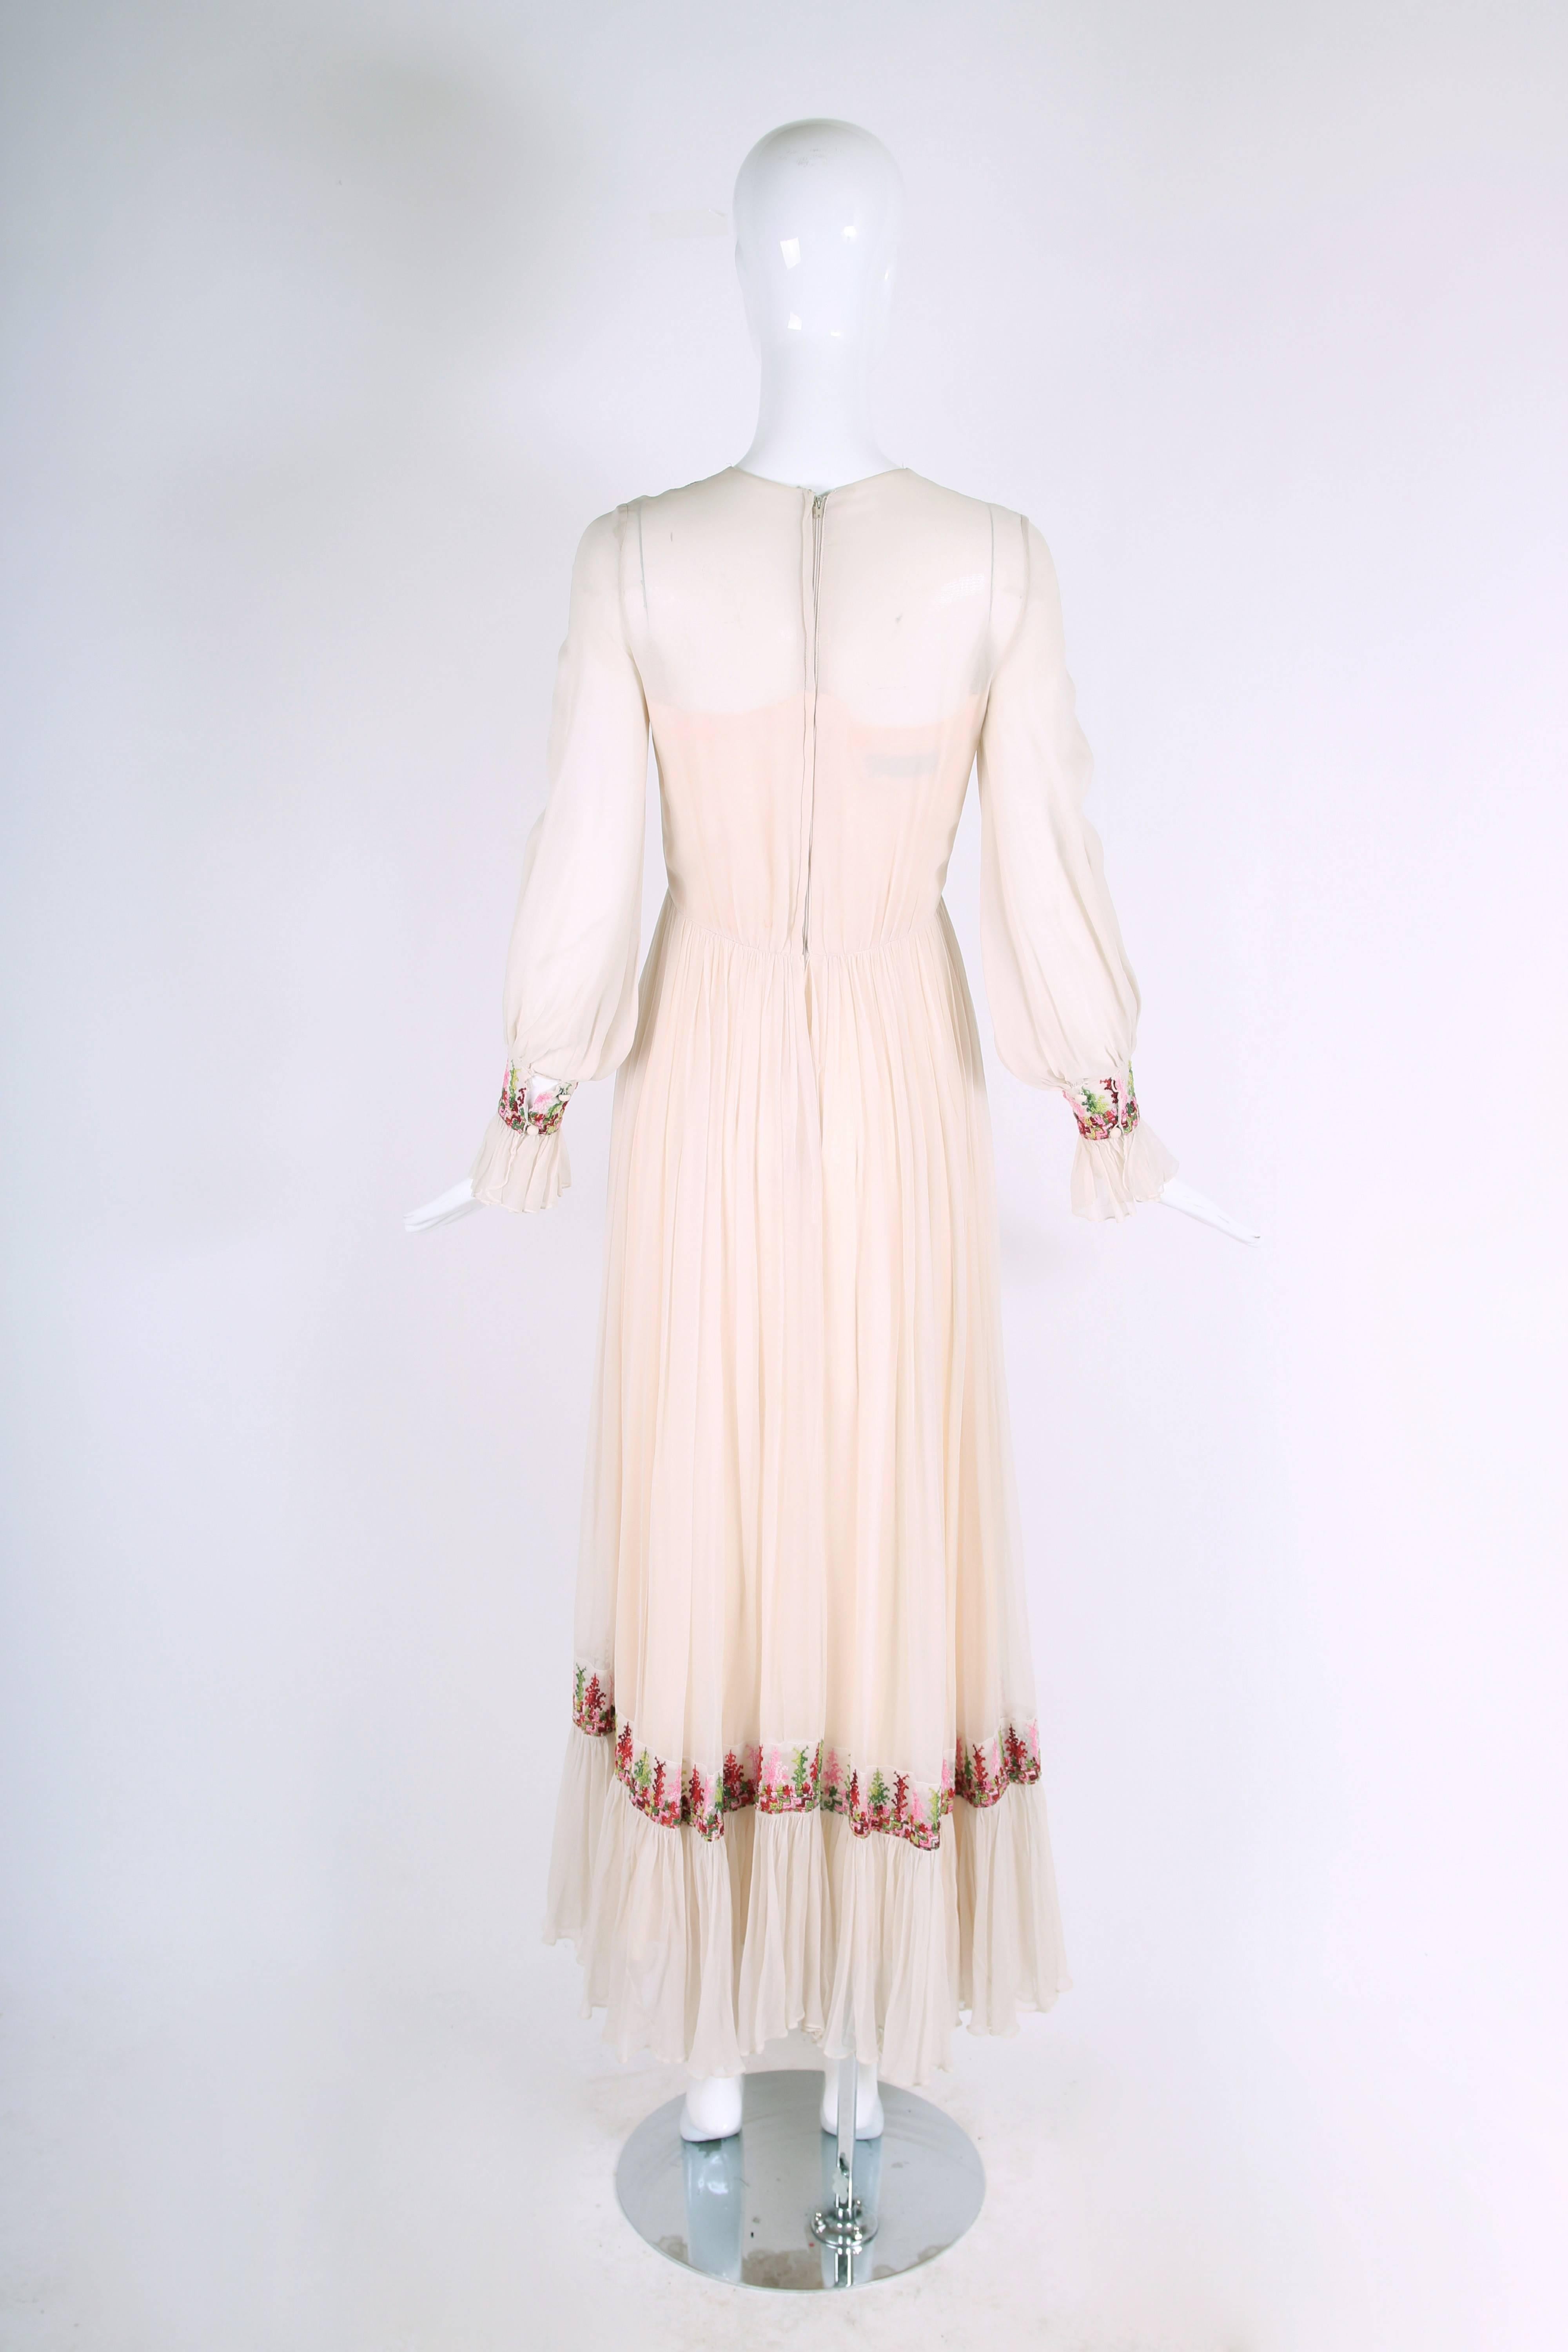 Women's Vintage Victor Costa Maxi Dress w/Embroidery